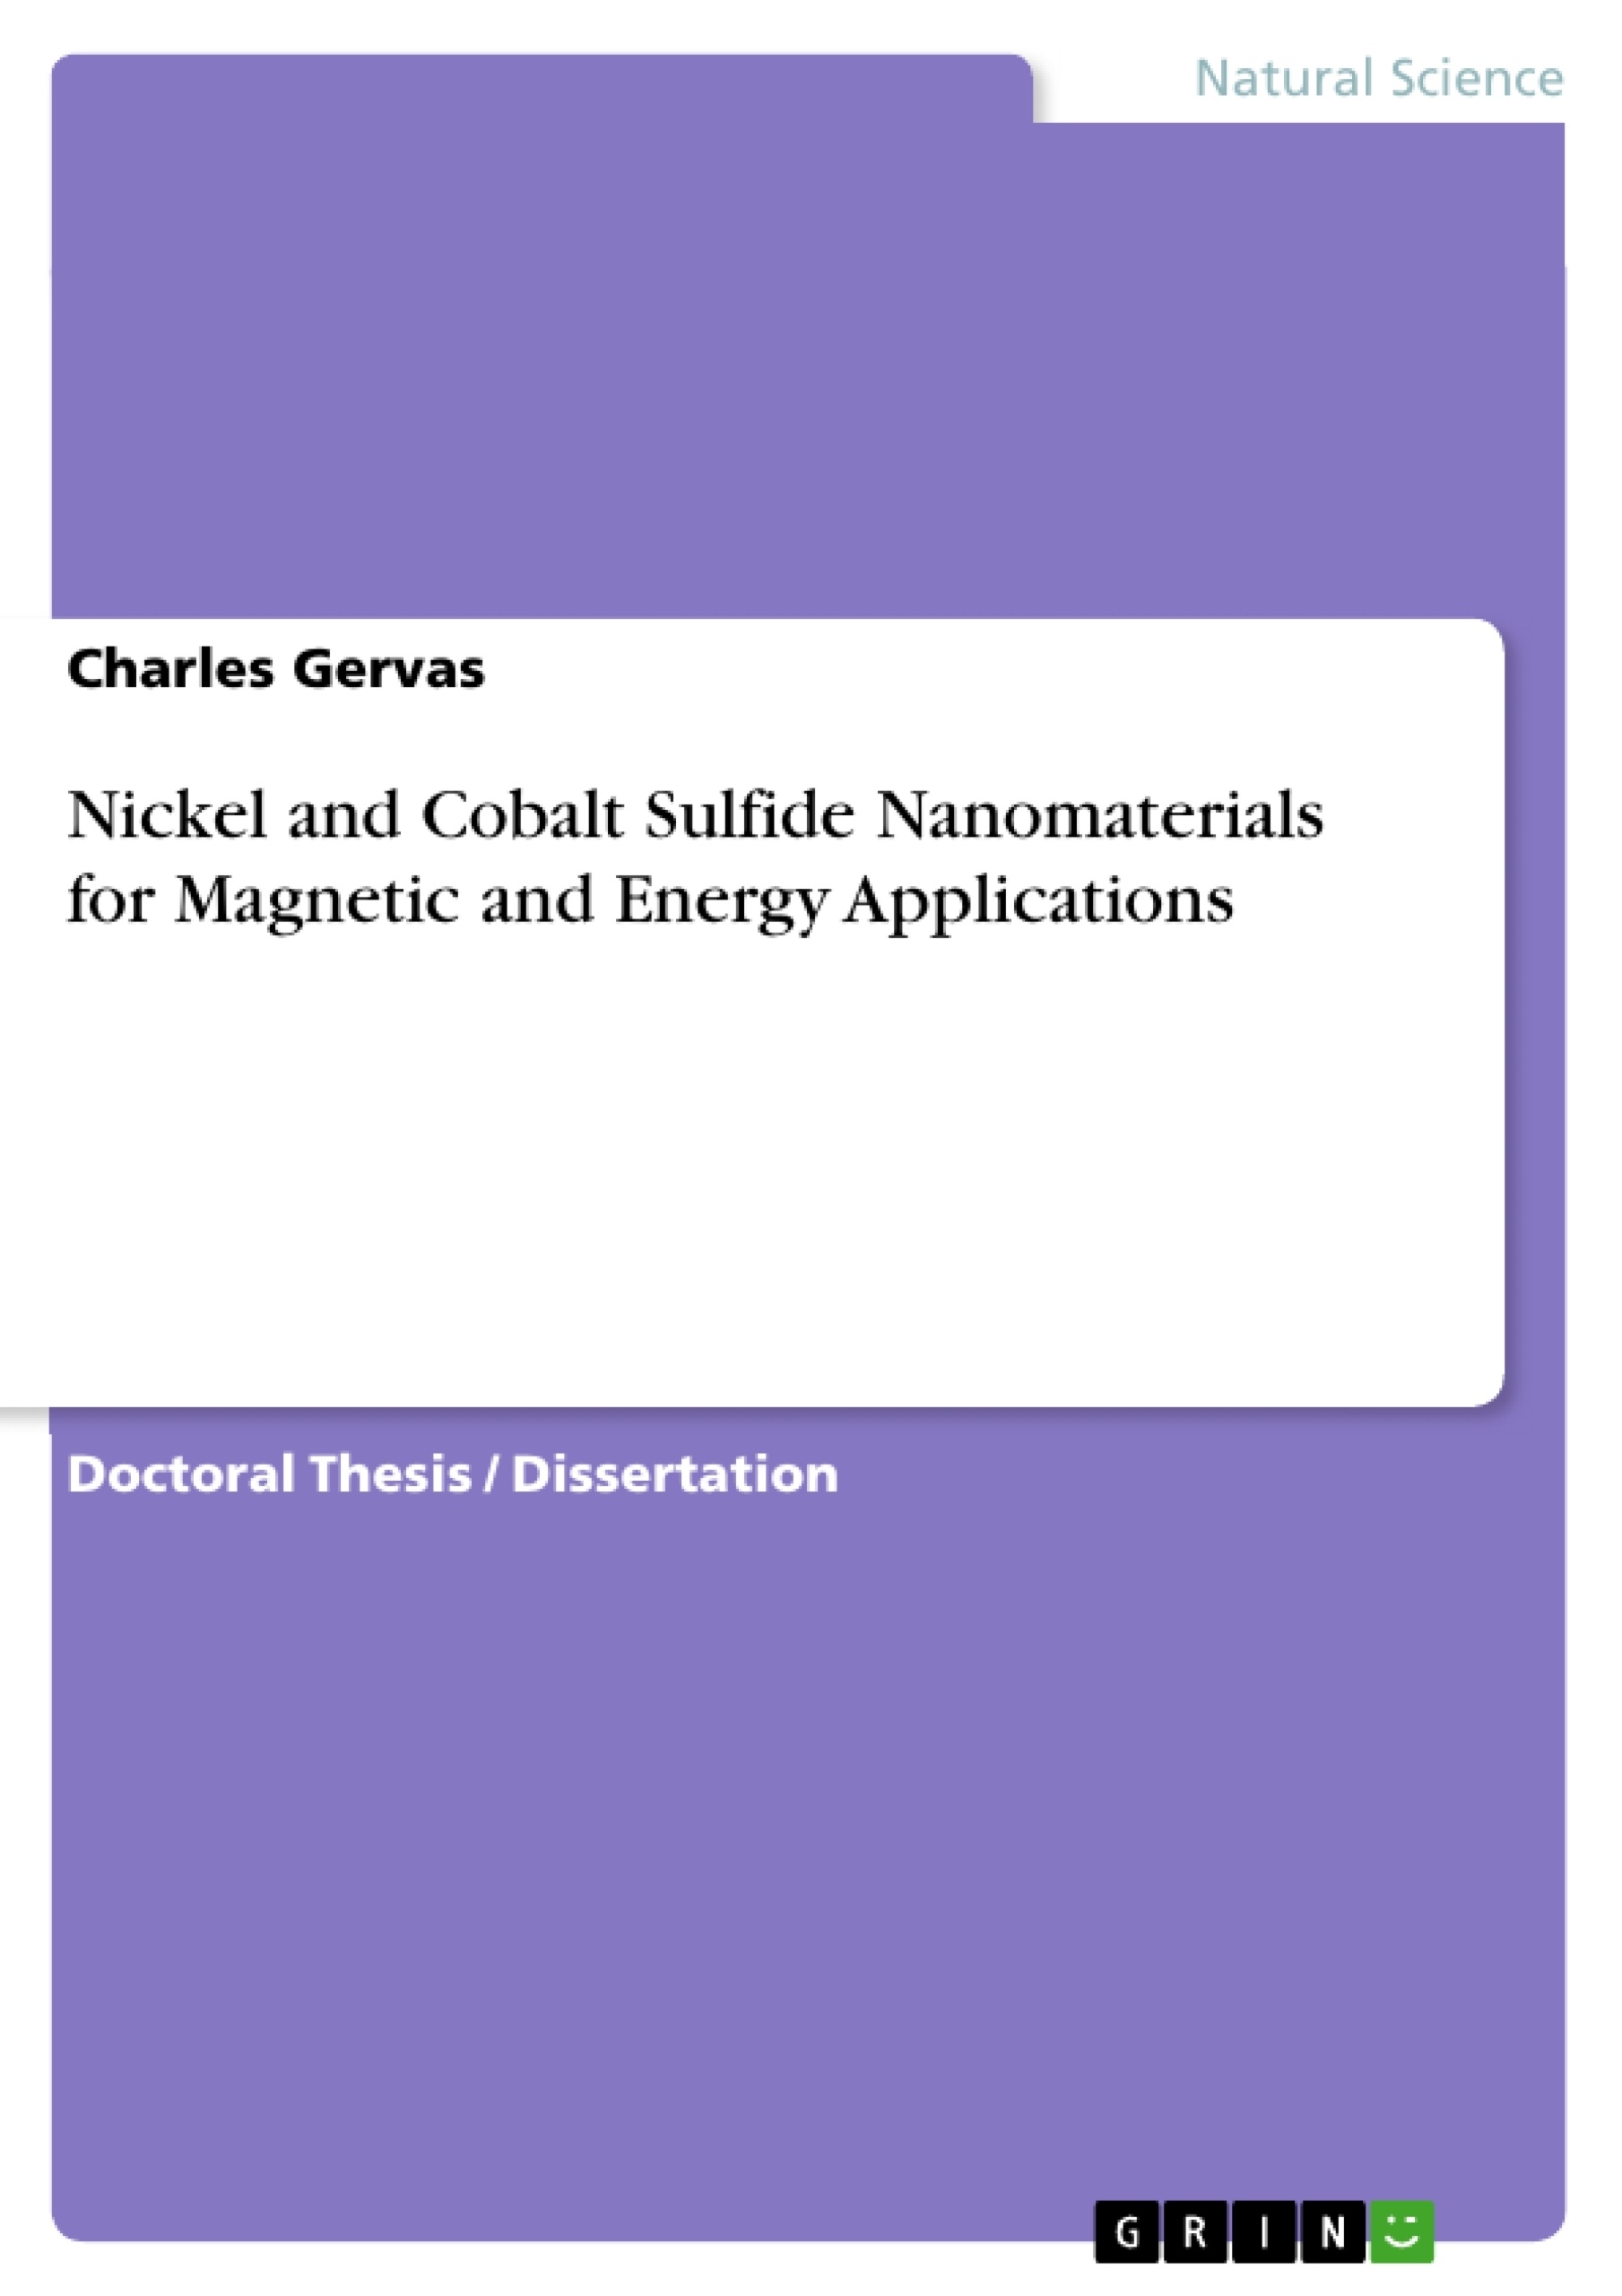 Titre: Nickel and Cobalt Sulfide Nanomaterials for Magnetic and Energy Applications